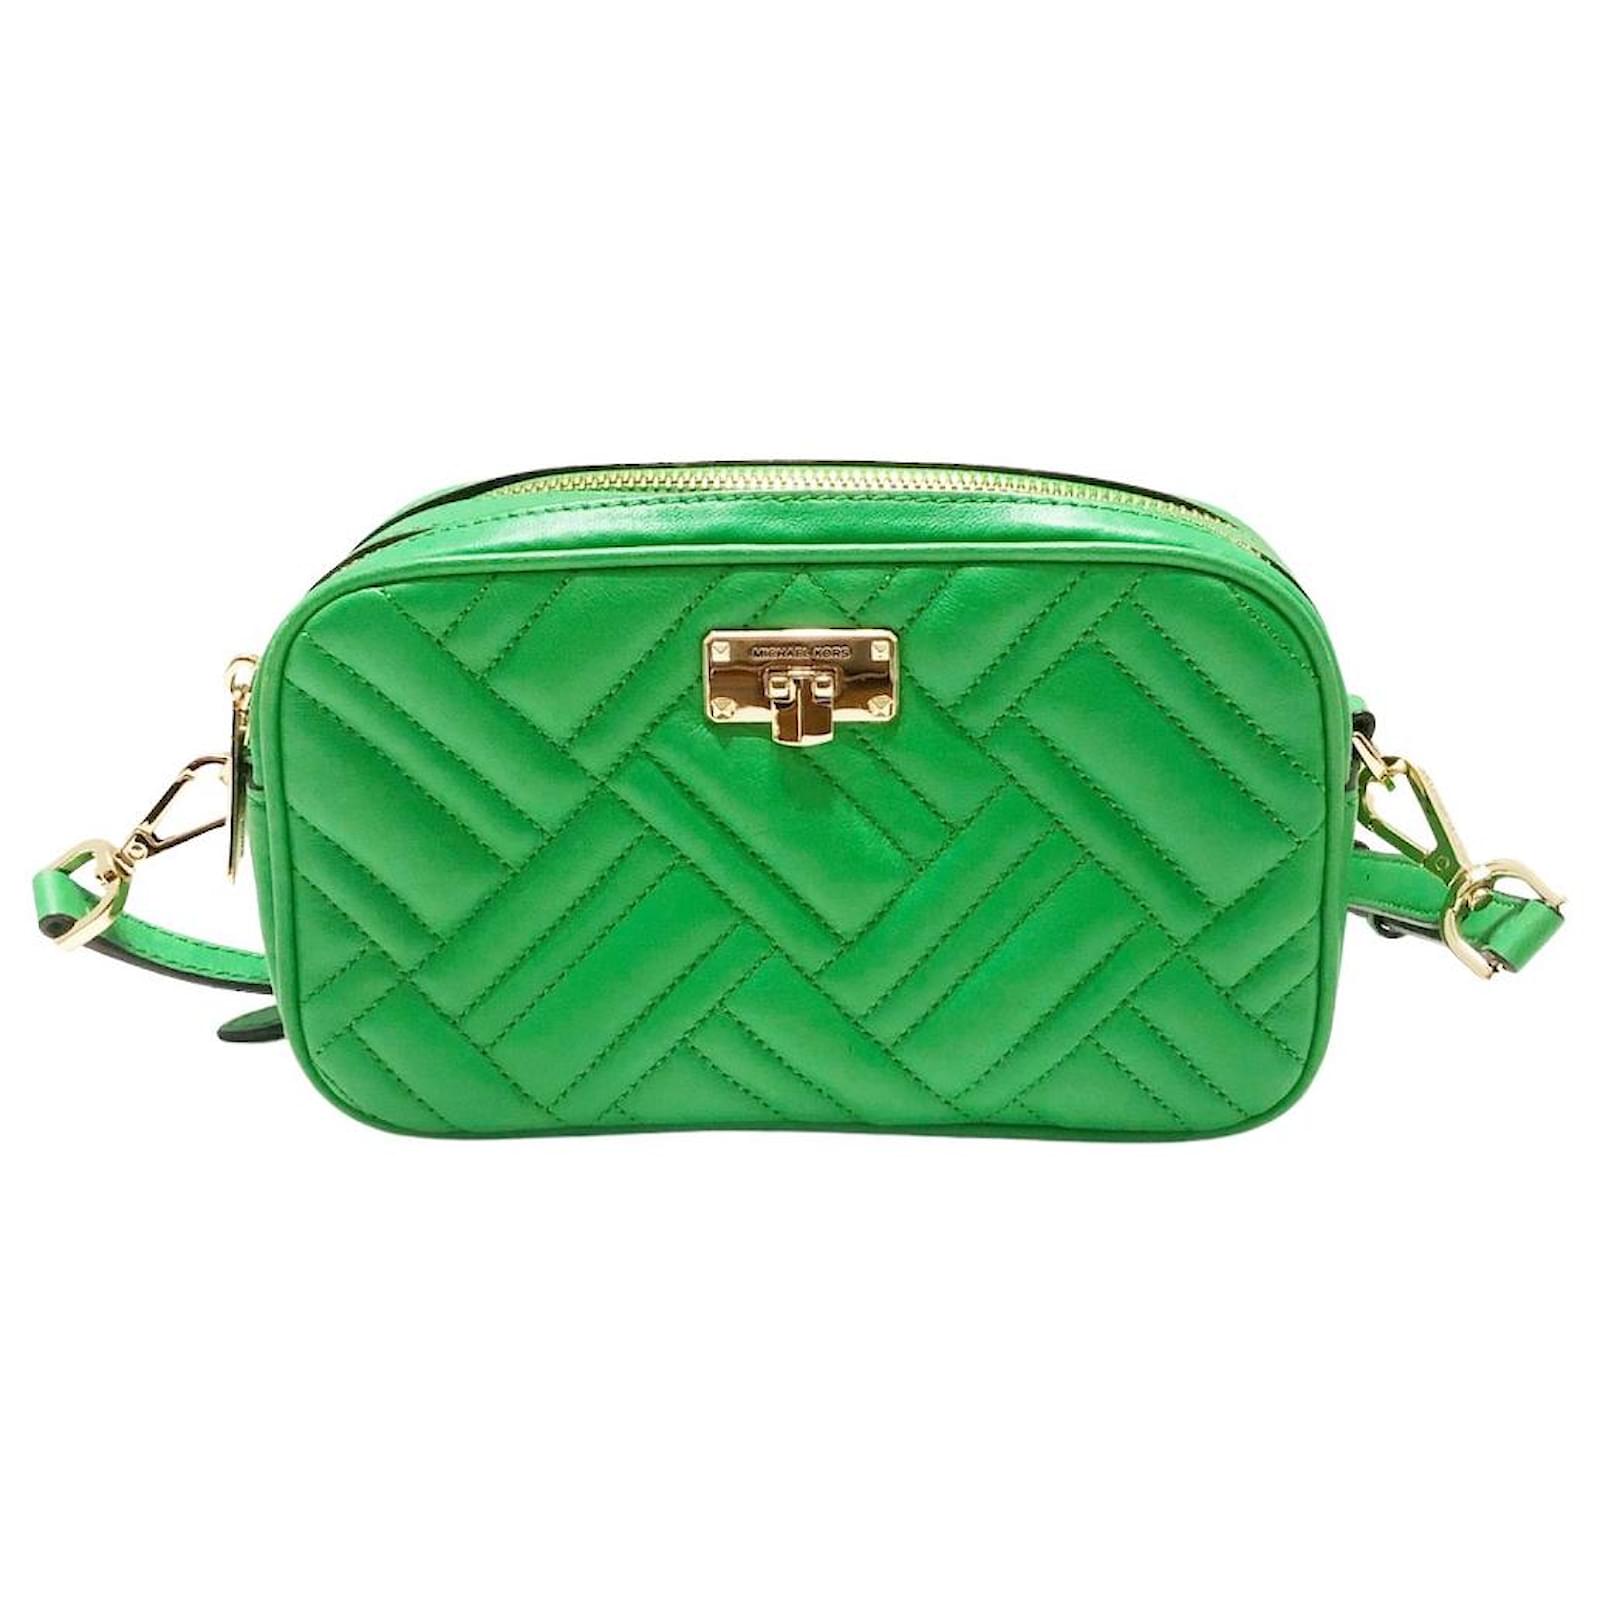 Buy the Michael Kors Green Purse Leather | GoodwillFinds